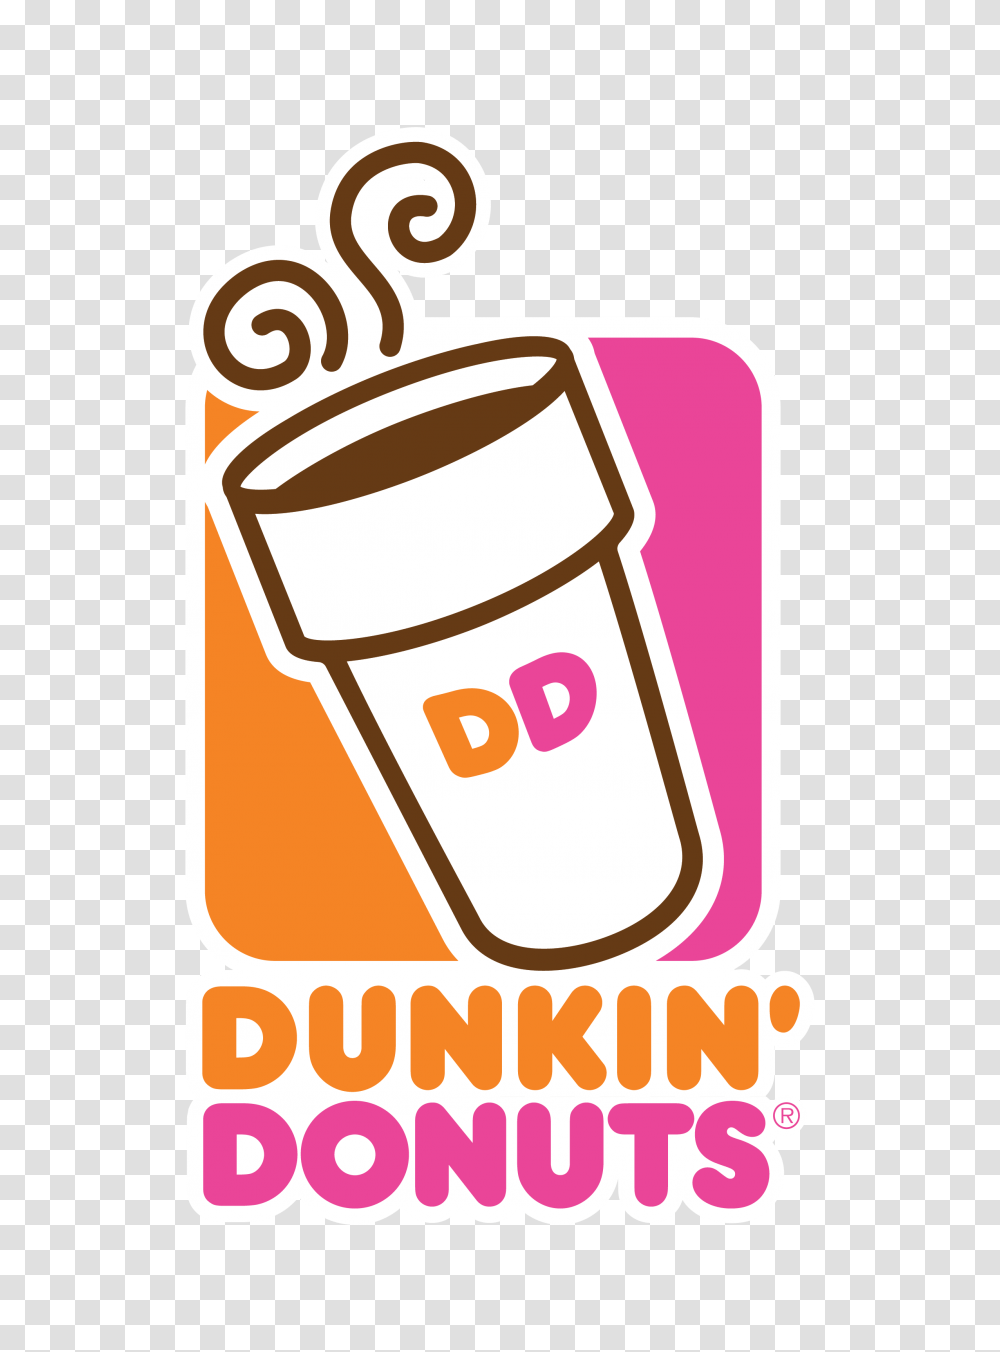 Dunkin Donuts Clipart Candy Floss Machine, Dynamite, Bomb, Weapon, Weaponry Transparent Png